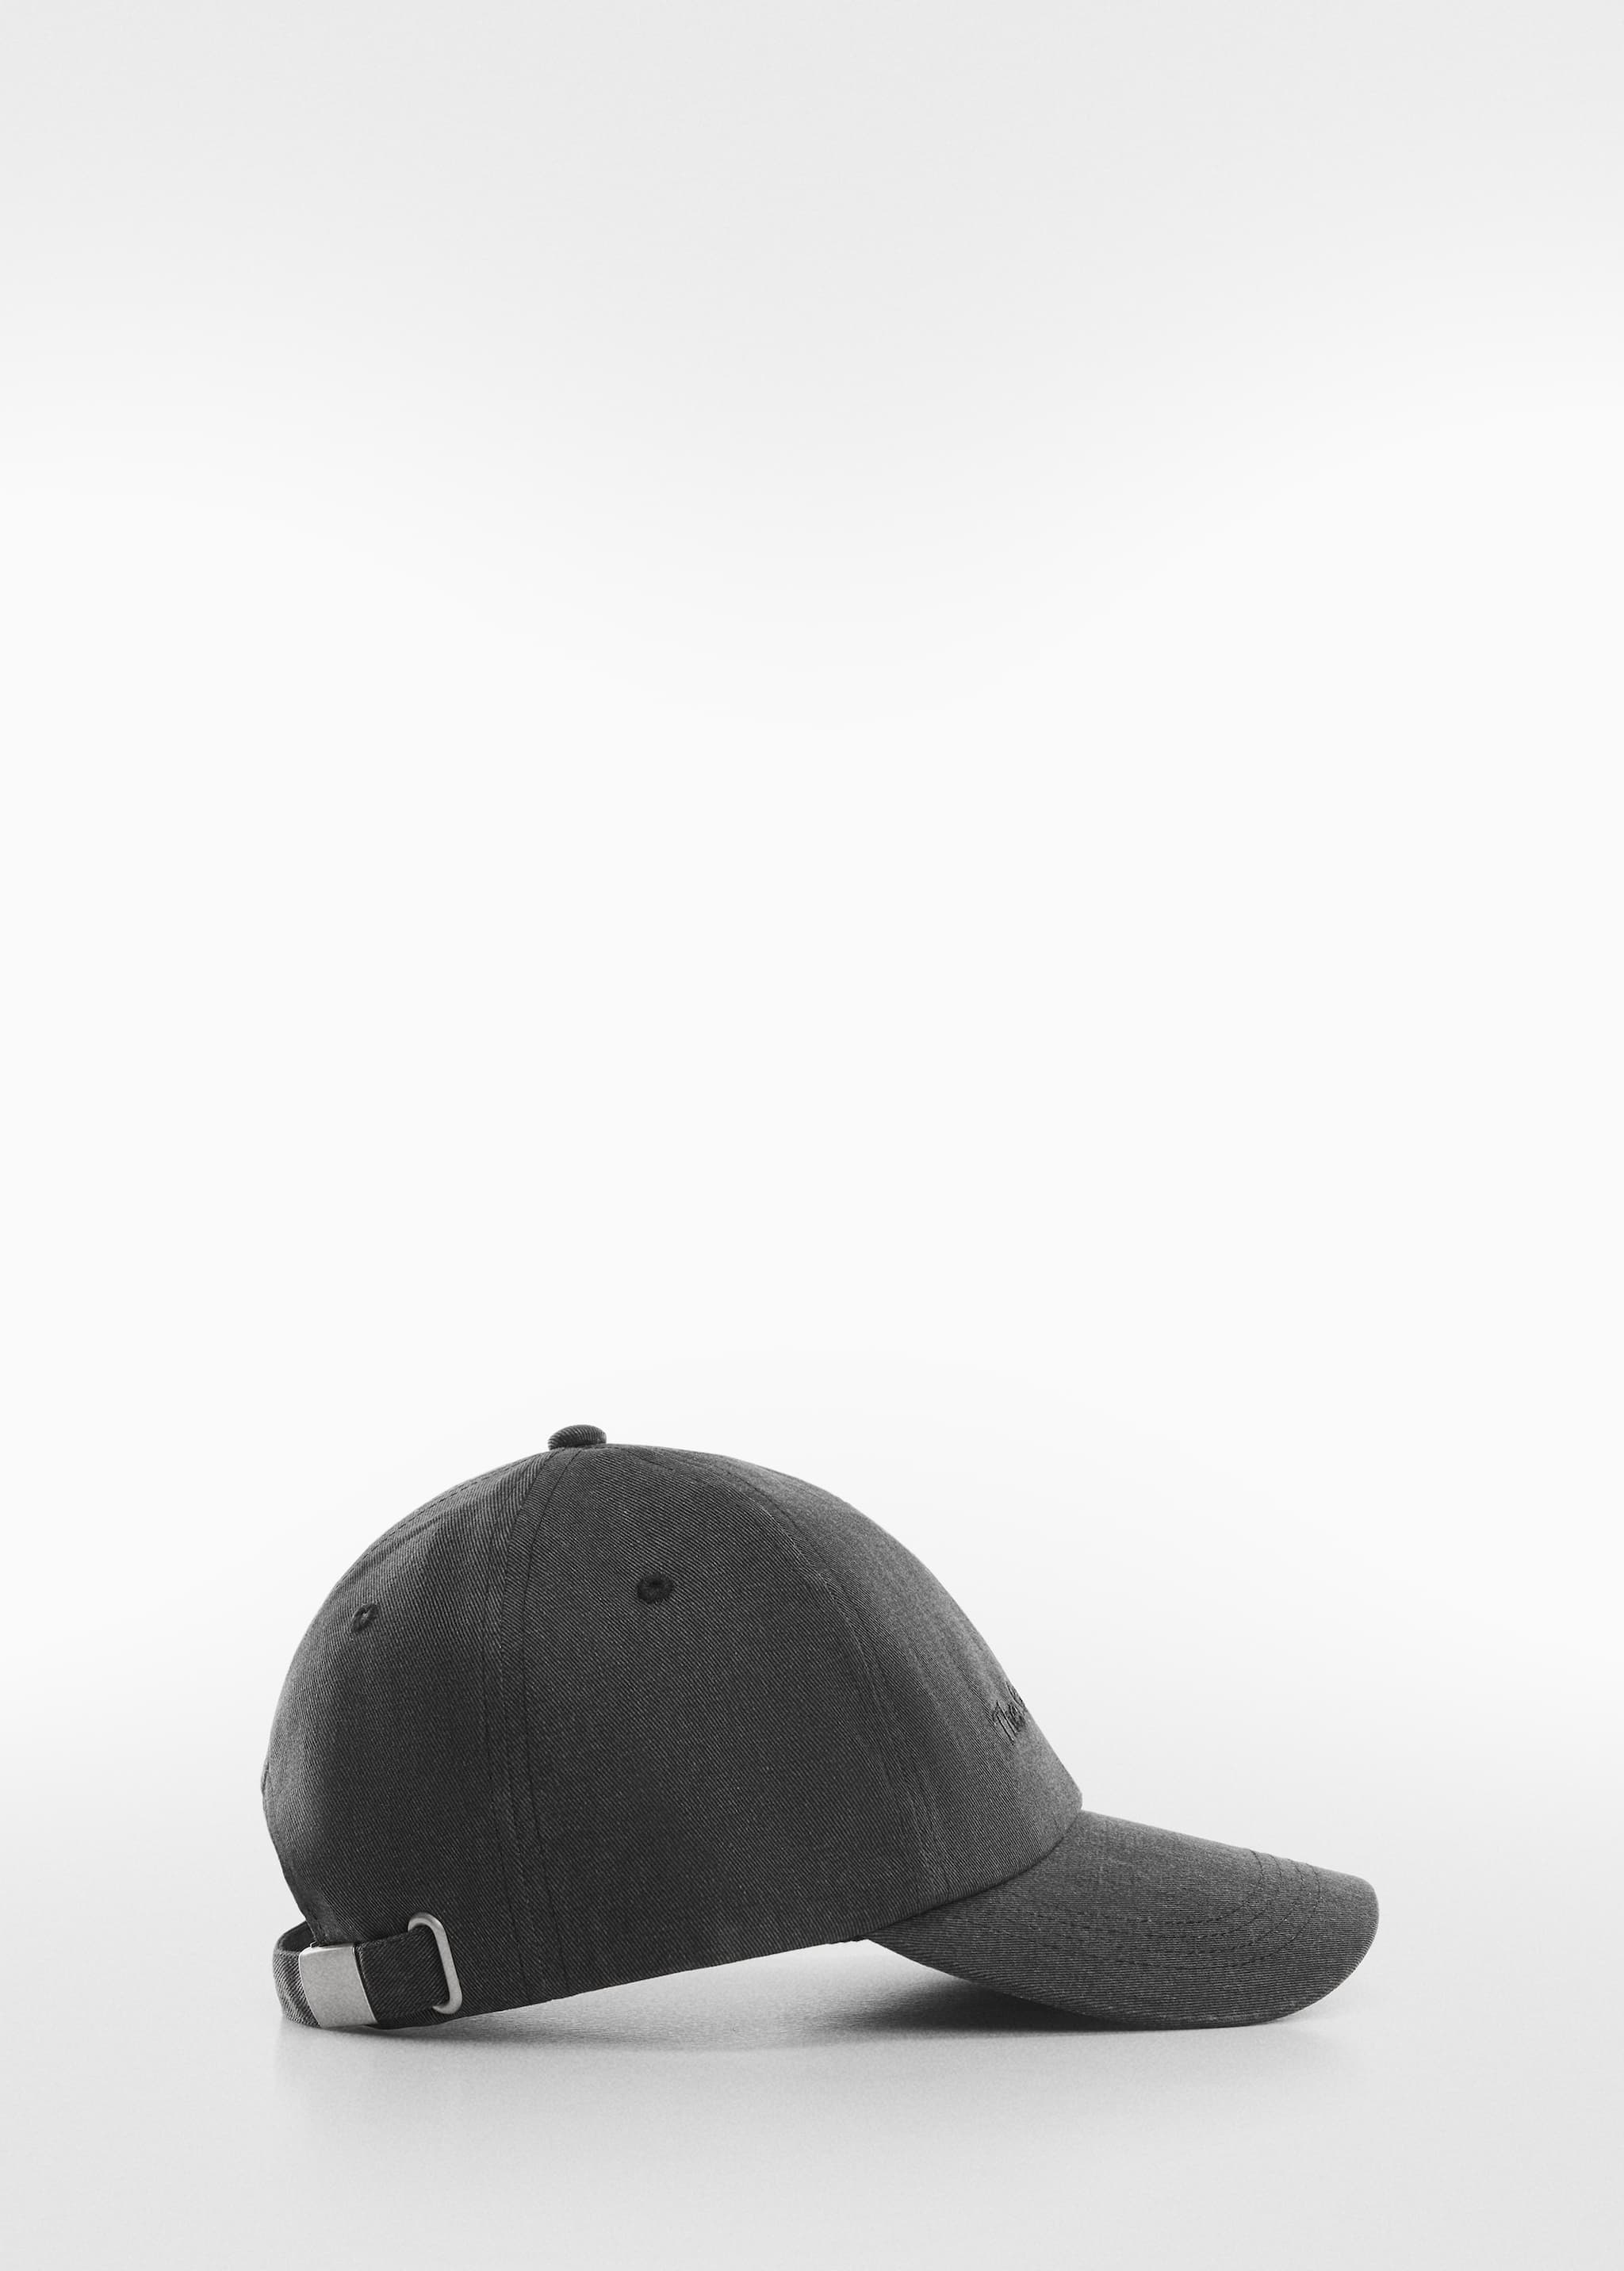 Denim cap with message - Article without model